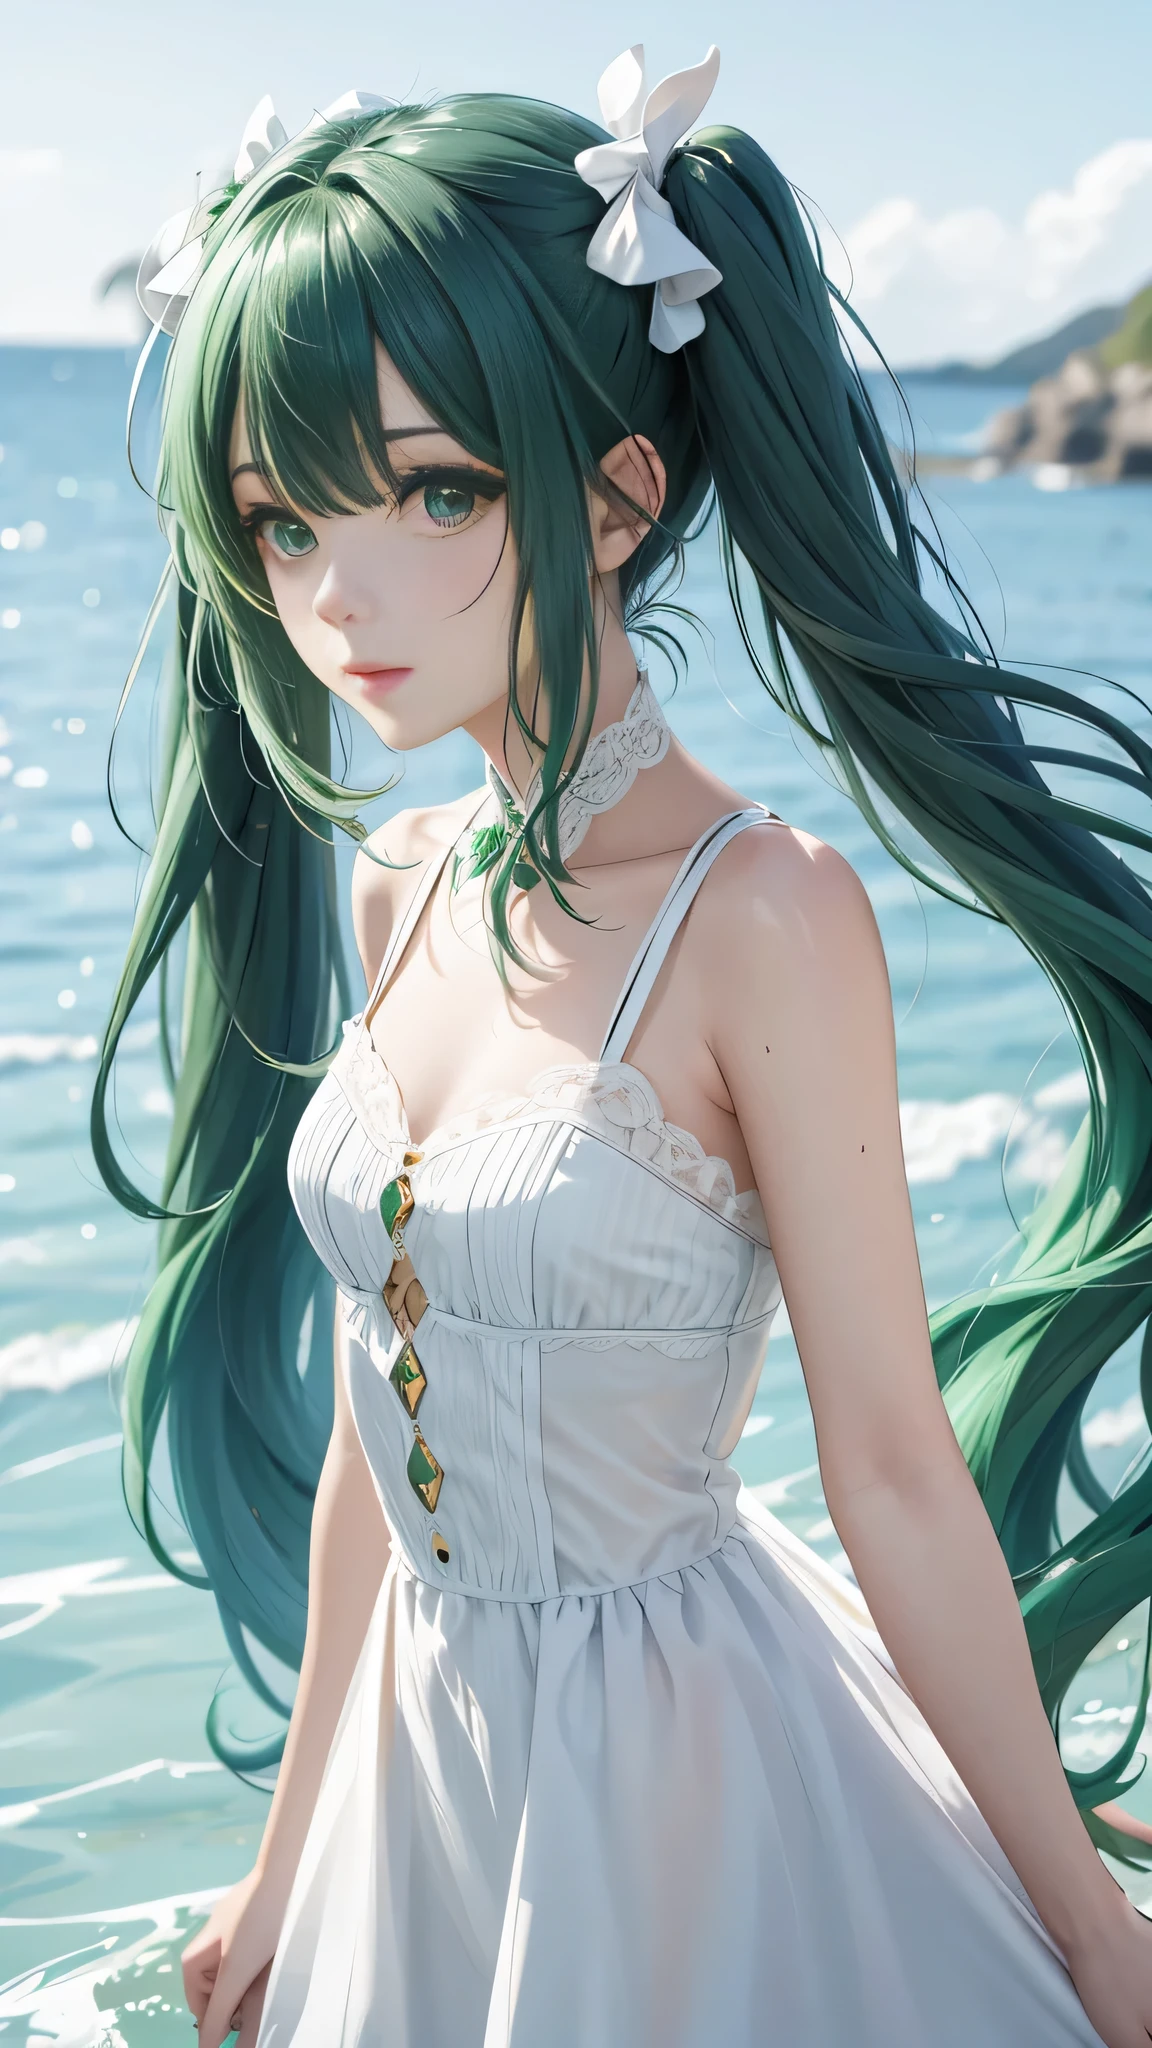 One girl, alone, hair ornaments, Green Hair, Twin tails, Long Hair, dress, water